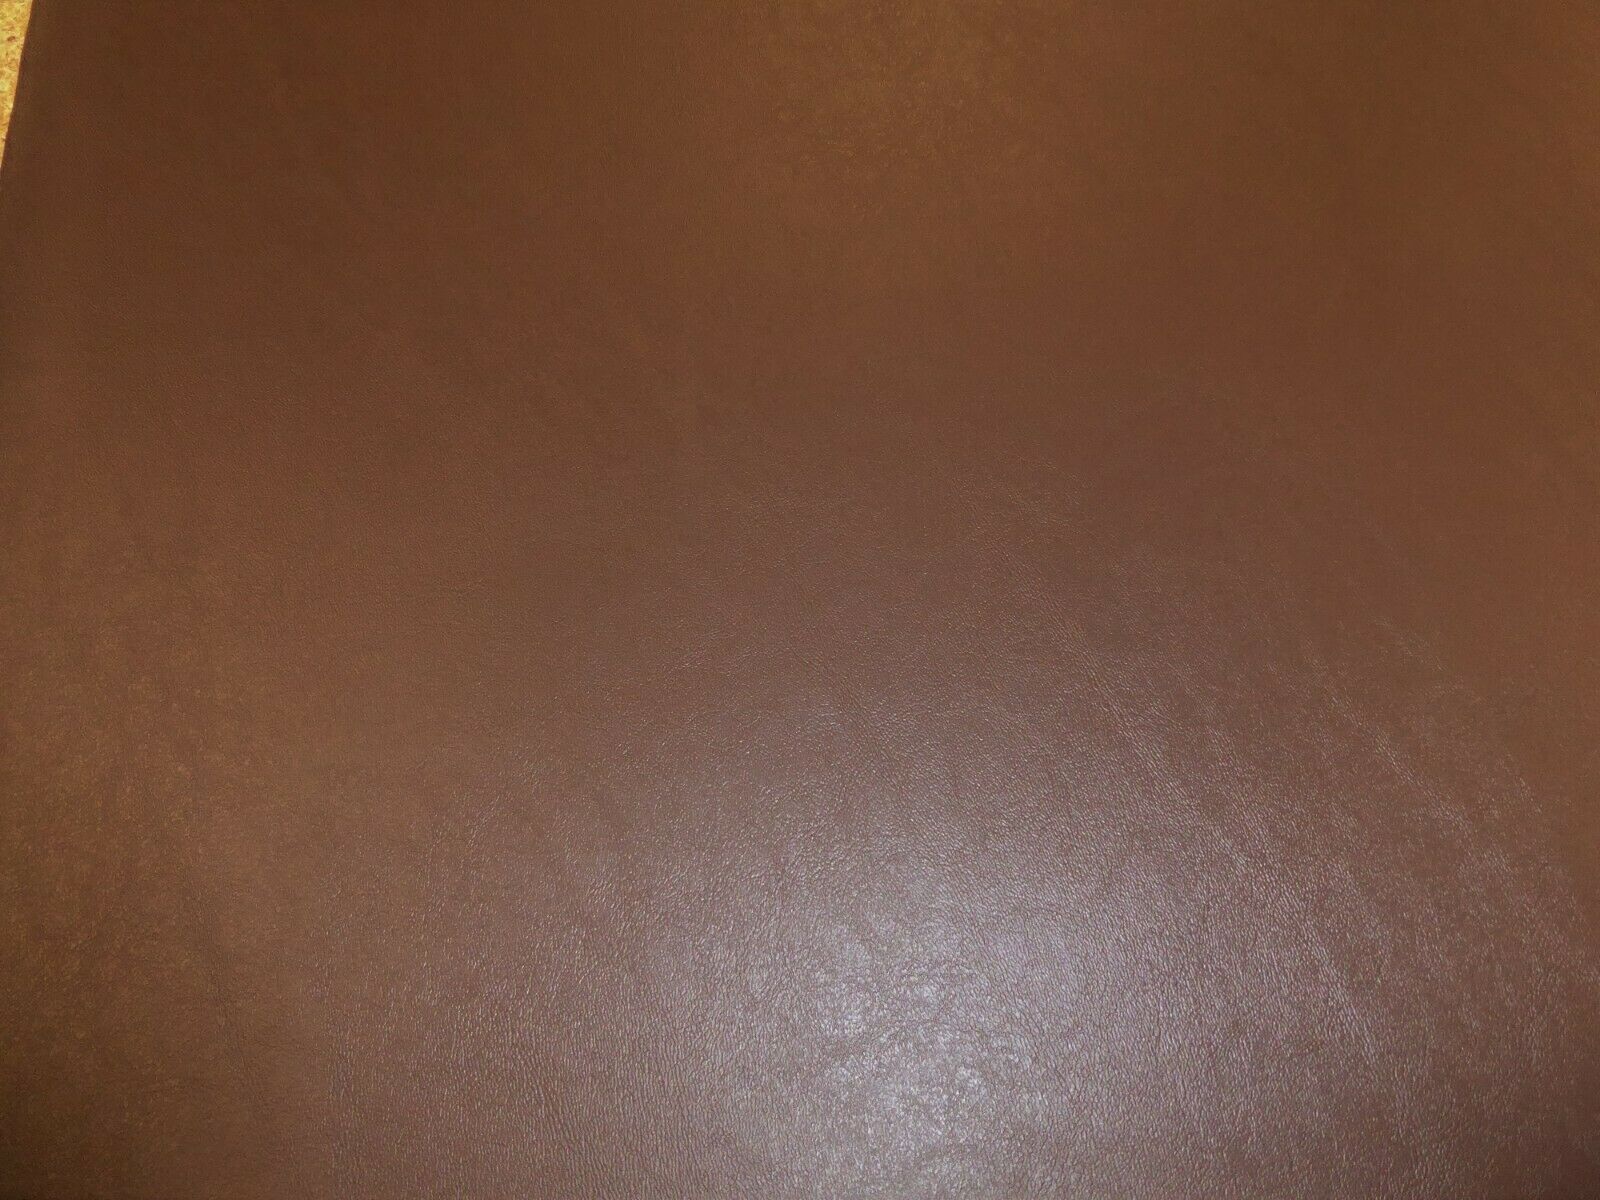 Brown Faux Leather Vinyl Upholstery, Faux Leather Upholstery Fabric